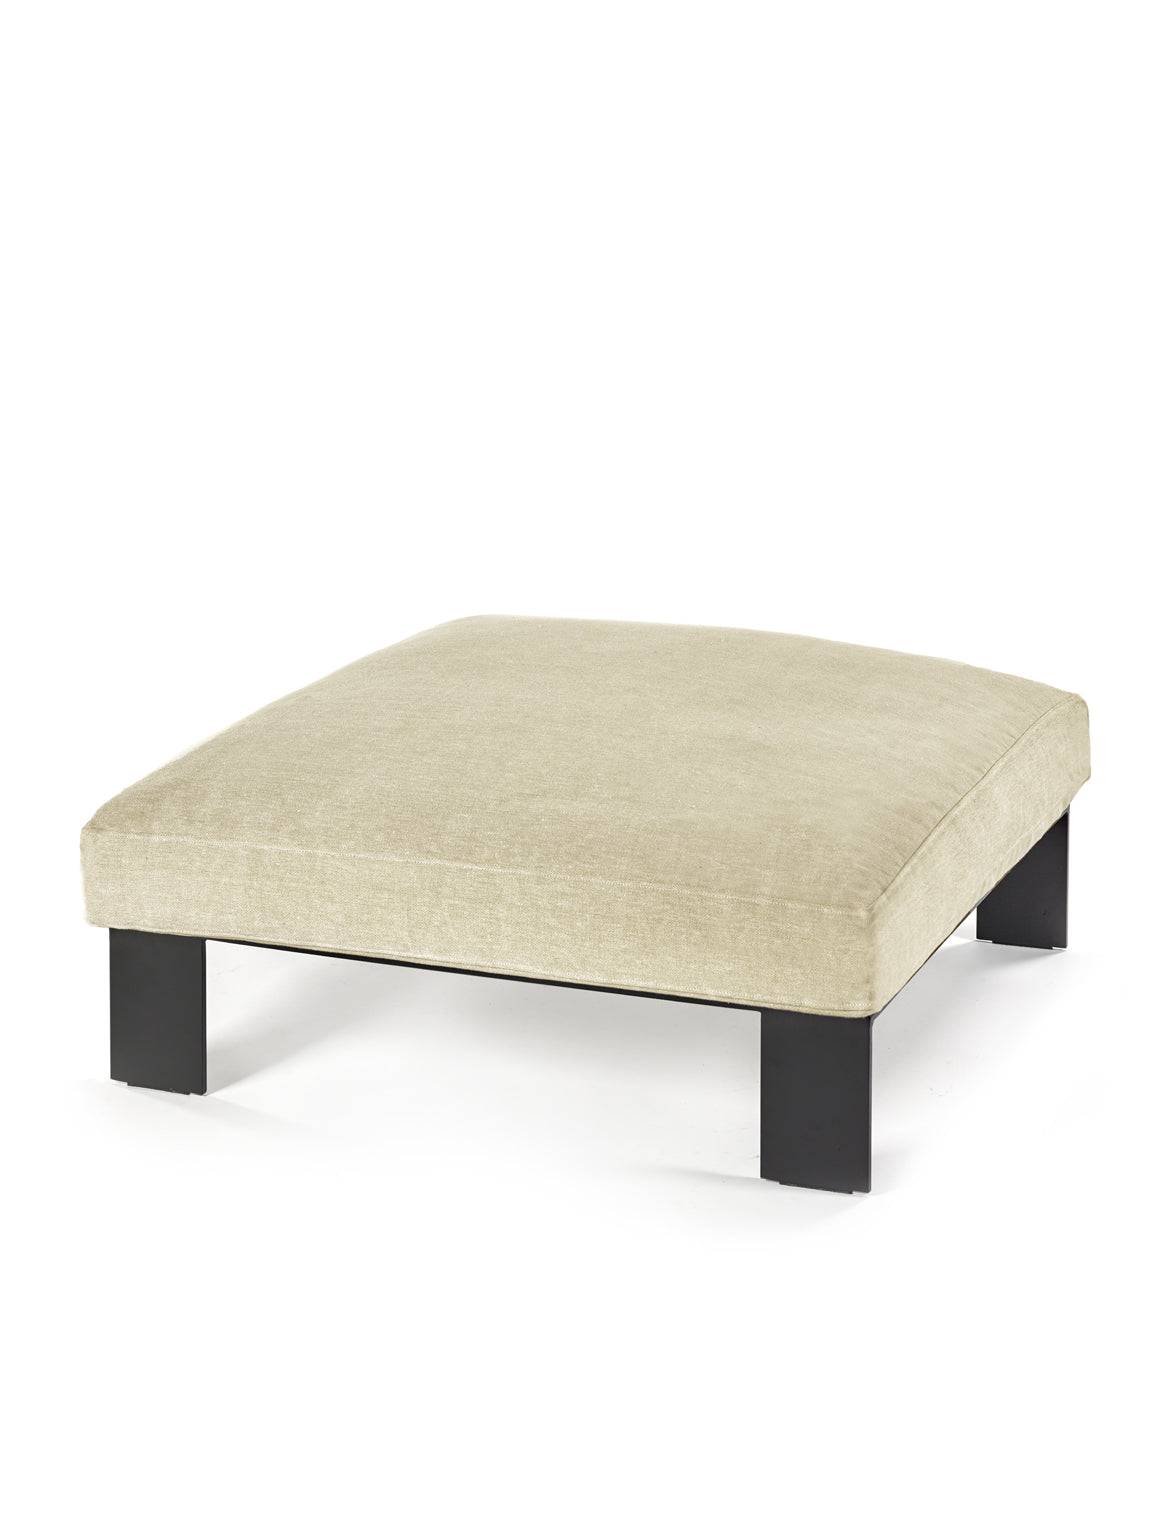 Mombaers Ottoman - Olive - THAT COOL LIVING